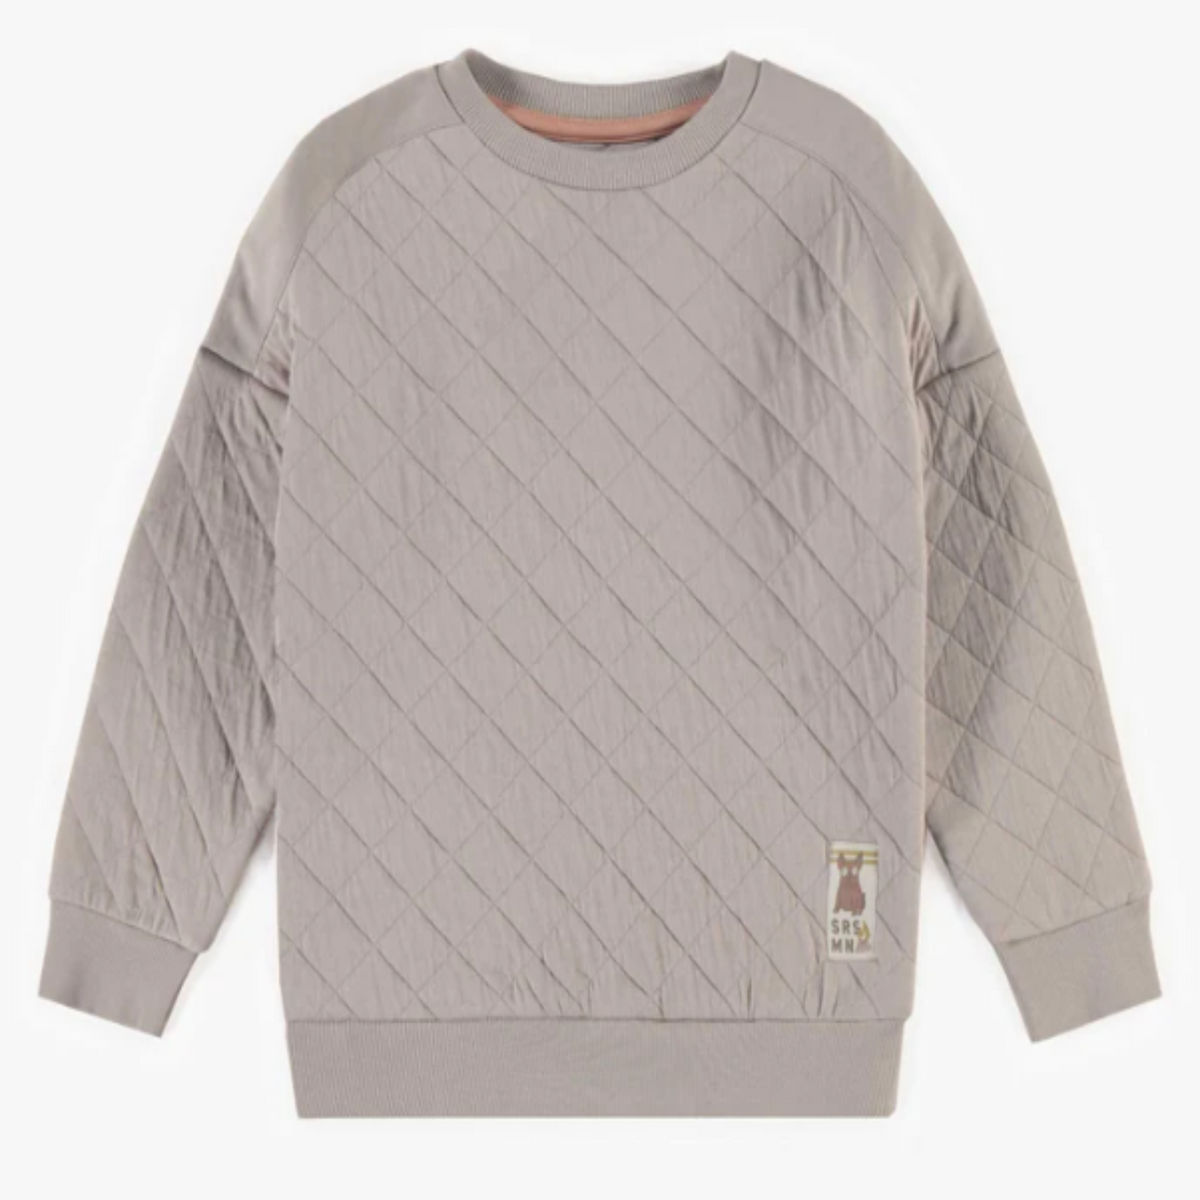 Grey sweater in quilted jersey